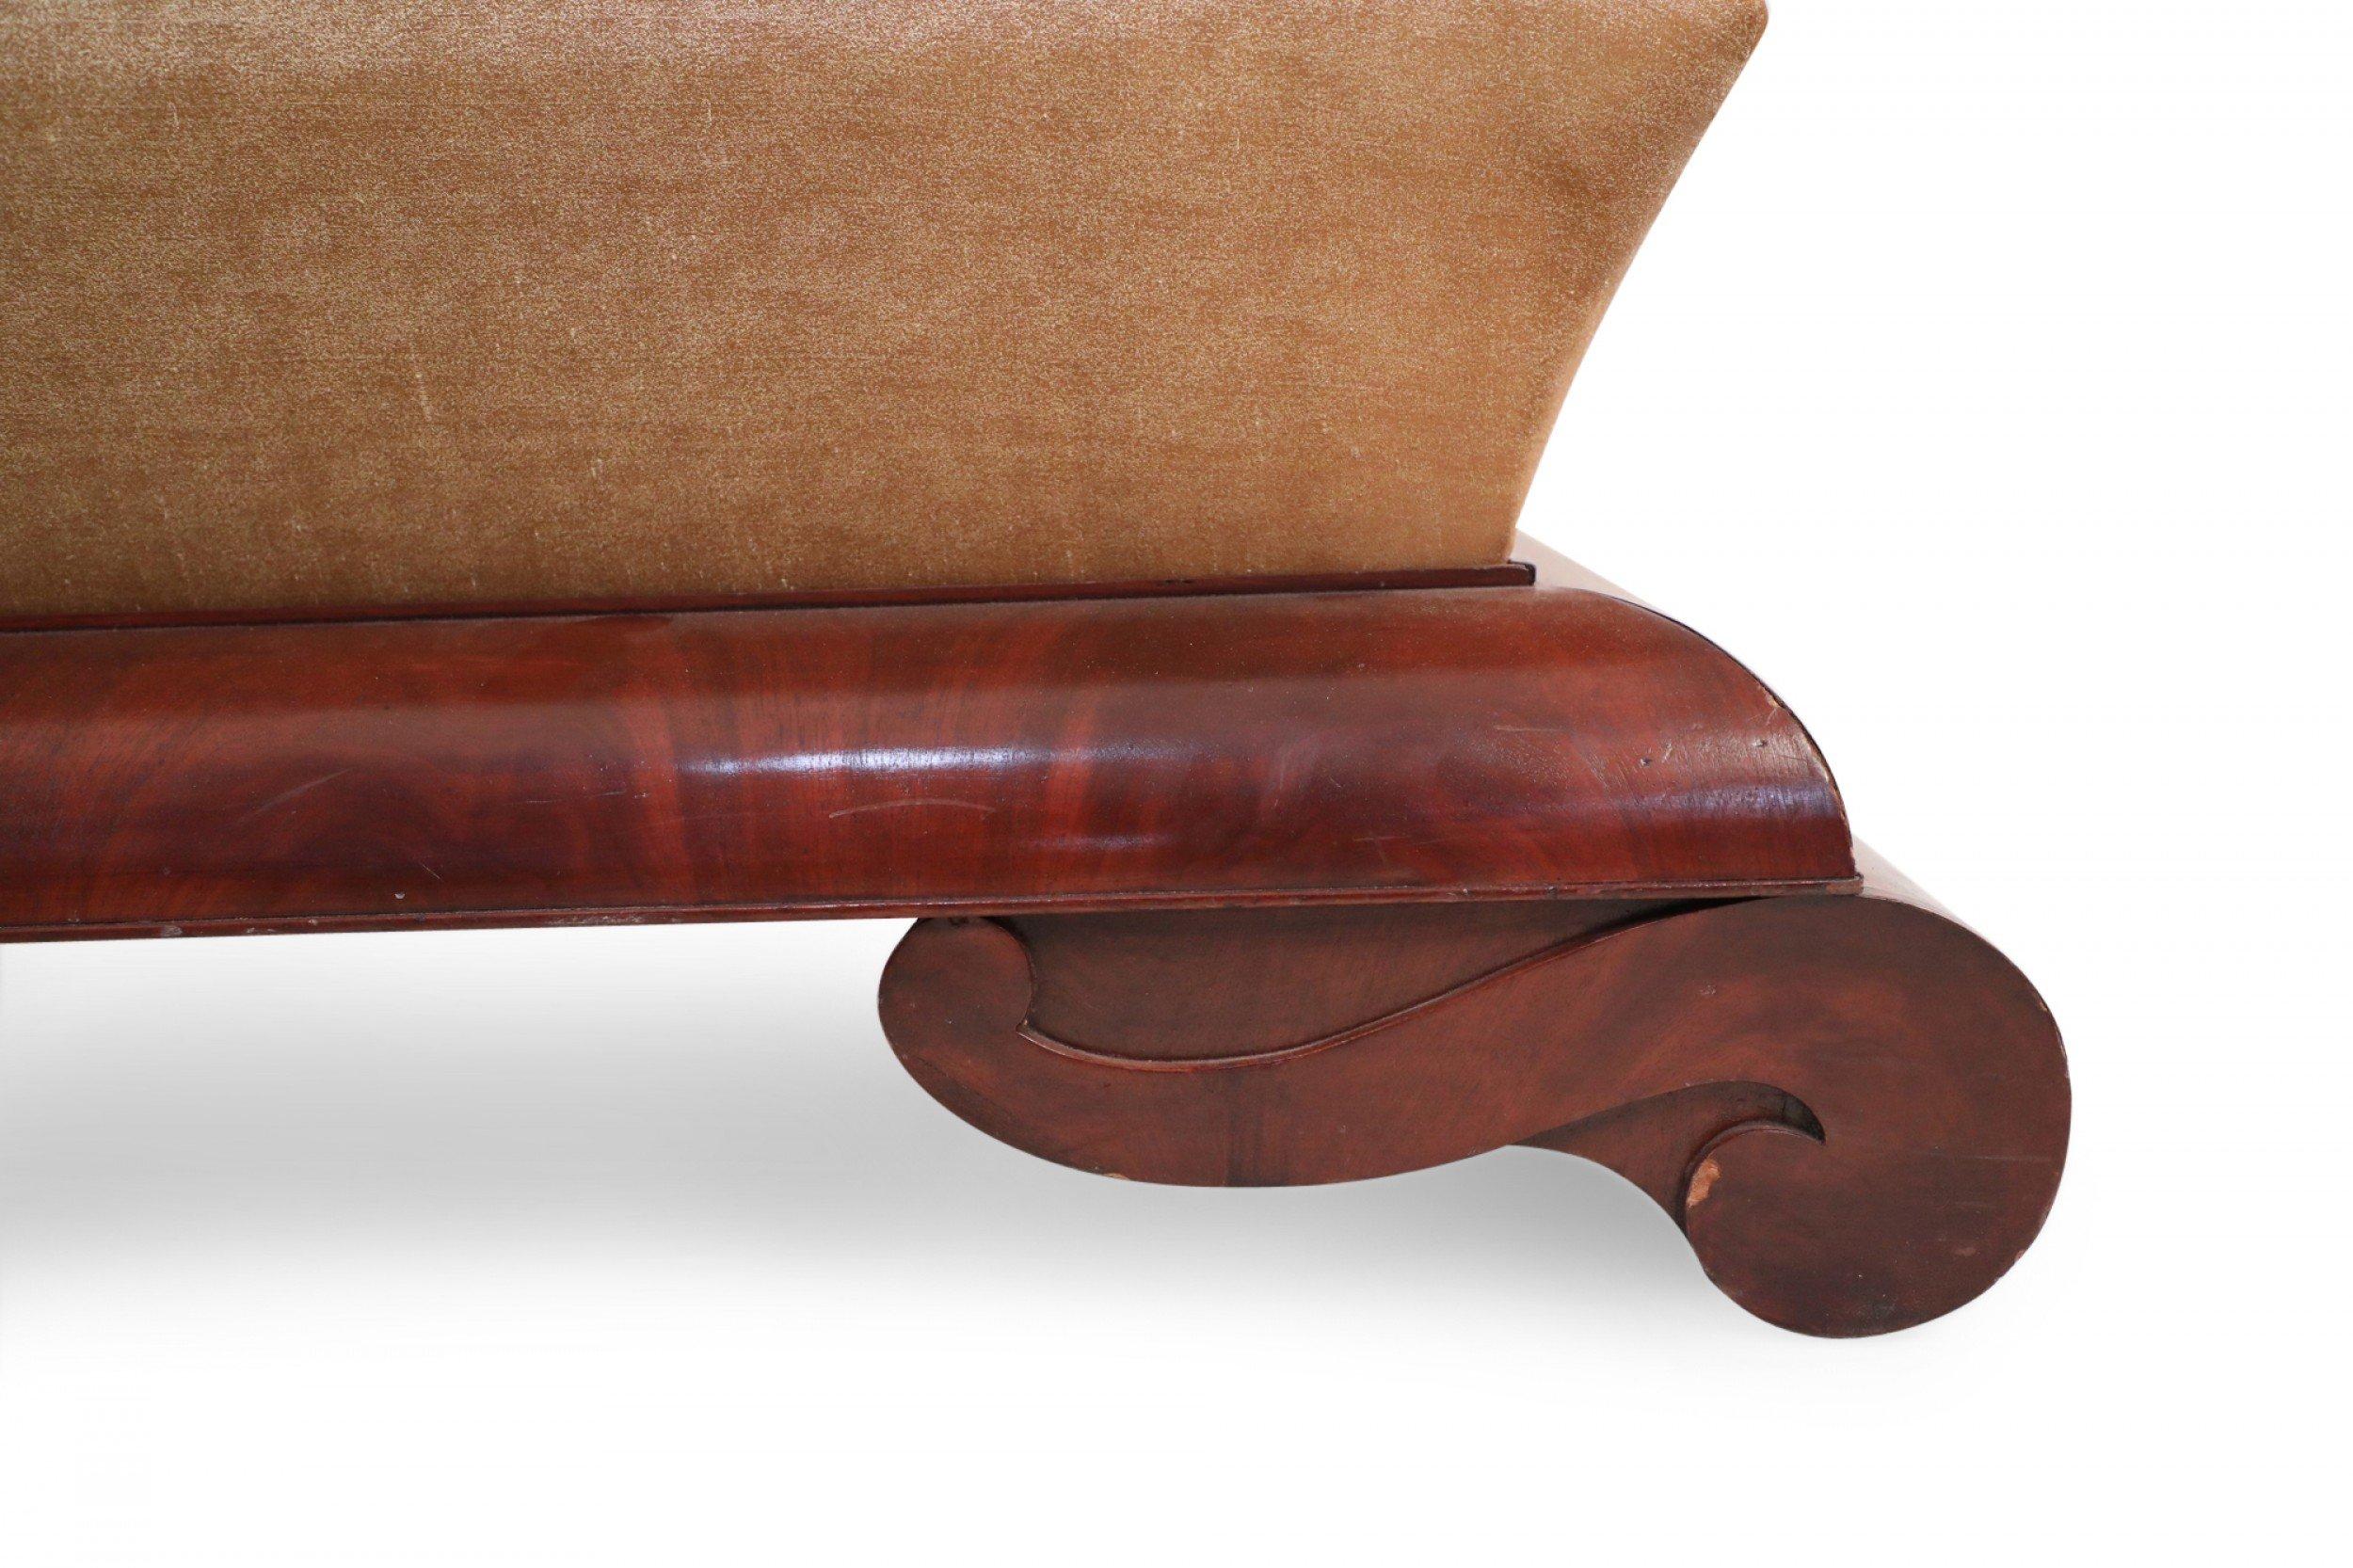 Pair of American Empire Crotch Mahogany Veneer Upholstered Window Seats For Sale 9